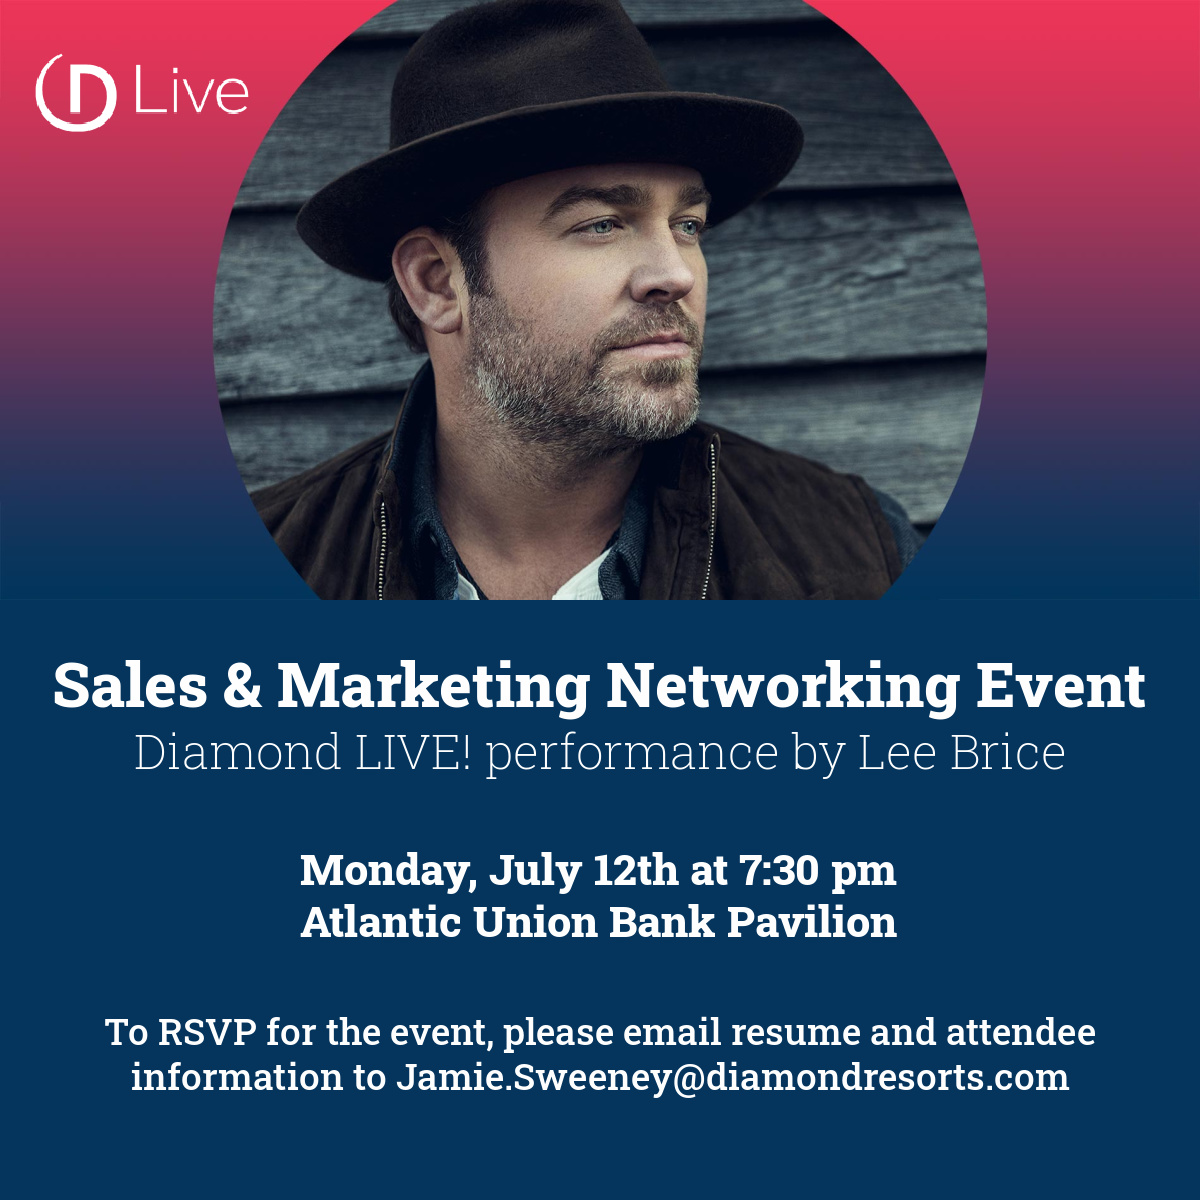 Join us for one of our AWARD WINNING events! We will be hosting a Sales & Marketing Networking Event on Monday, July 12th at the @leebrice Diamond LIVE! event! Contact me today to RSVP!